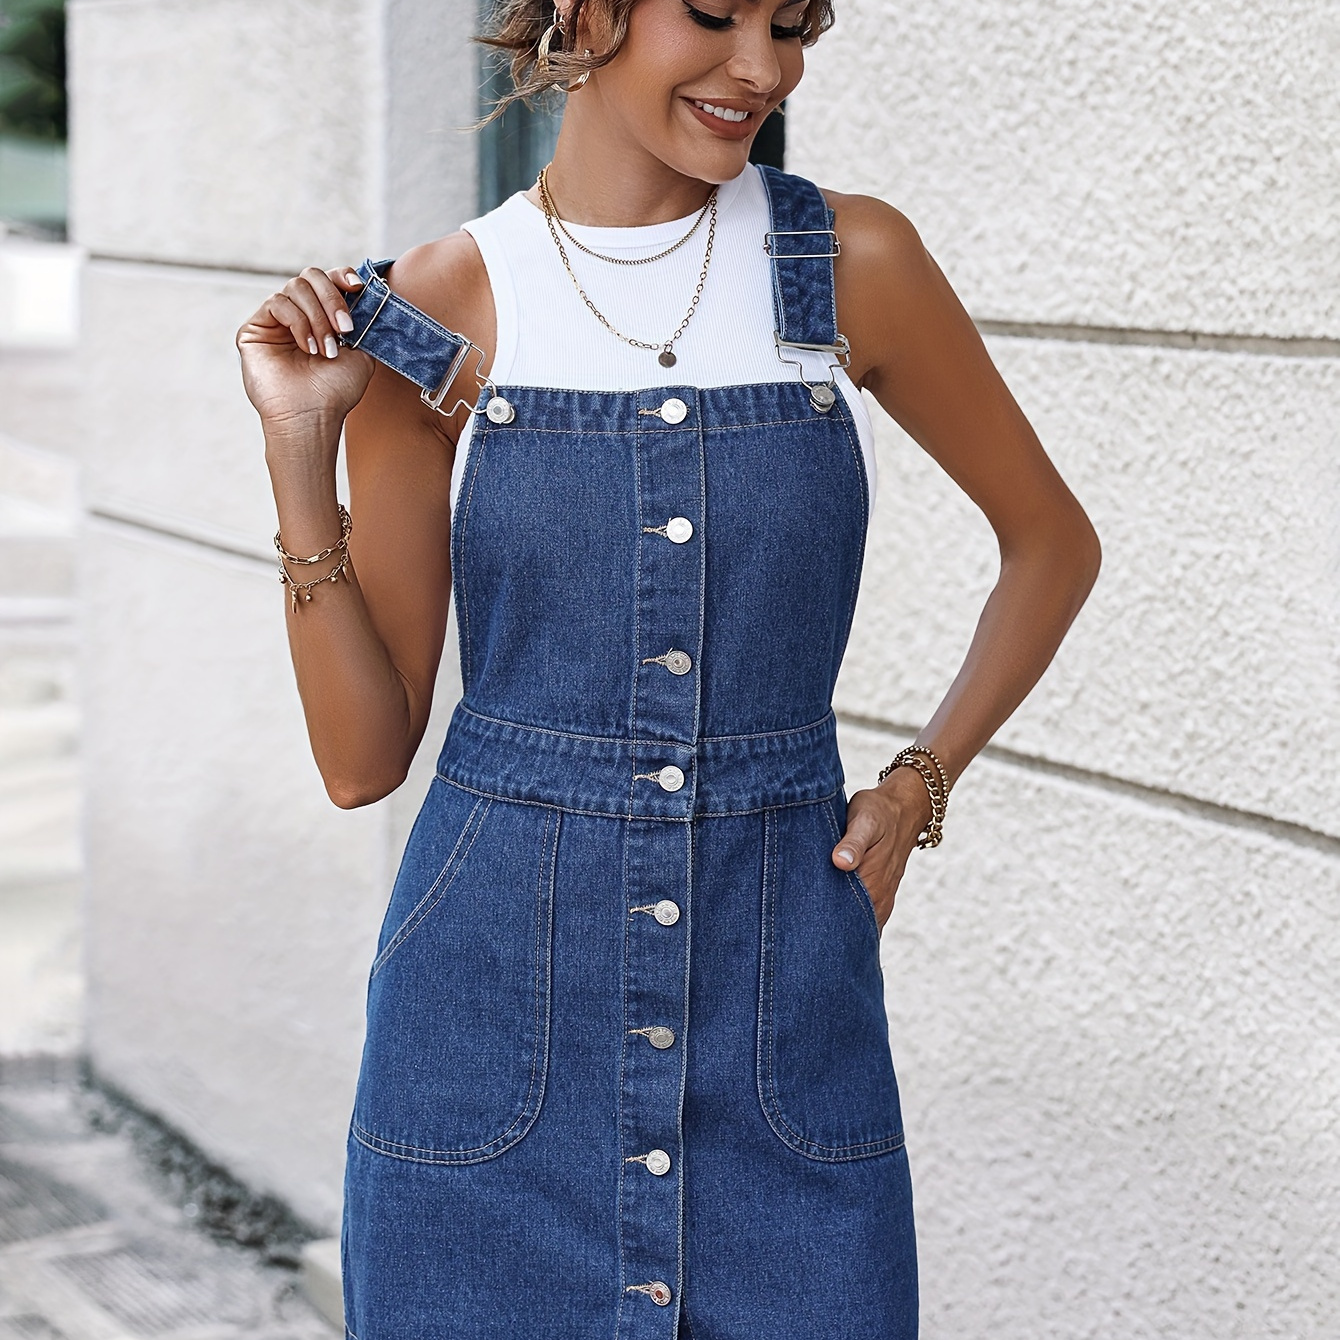 

Women's Slim-fit Denim Overall Dress, Elegant Style With Button Front And Pocket Detail, Casual Single-breasted Jean Pinafore